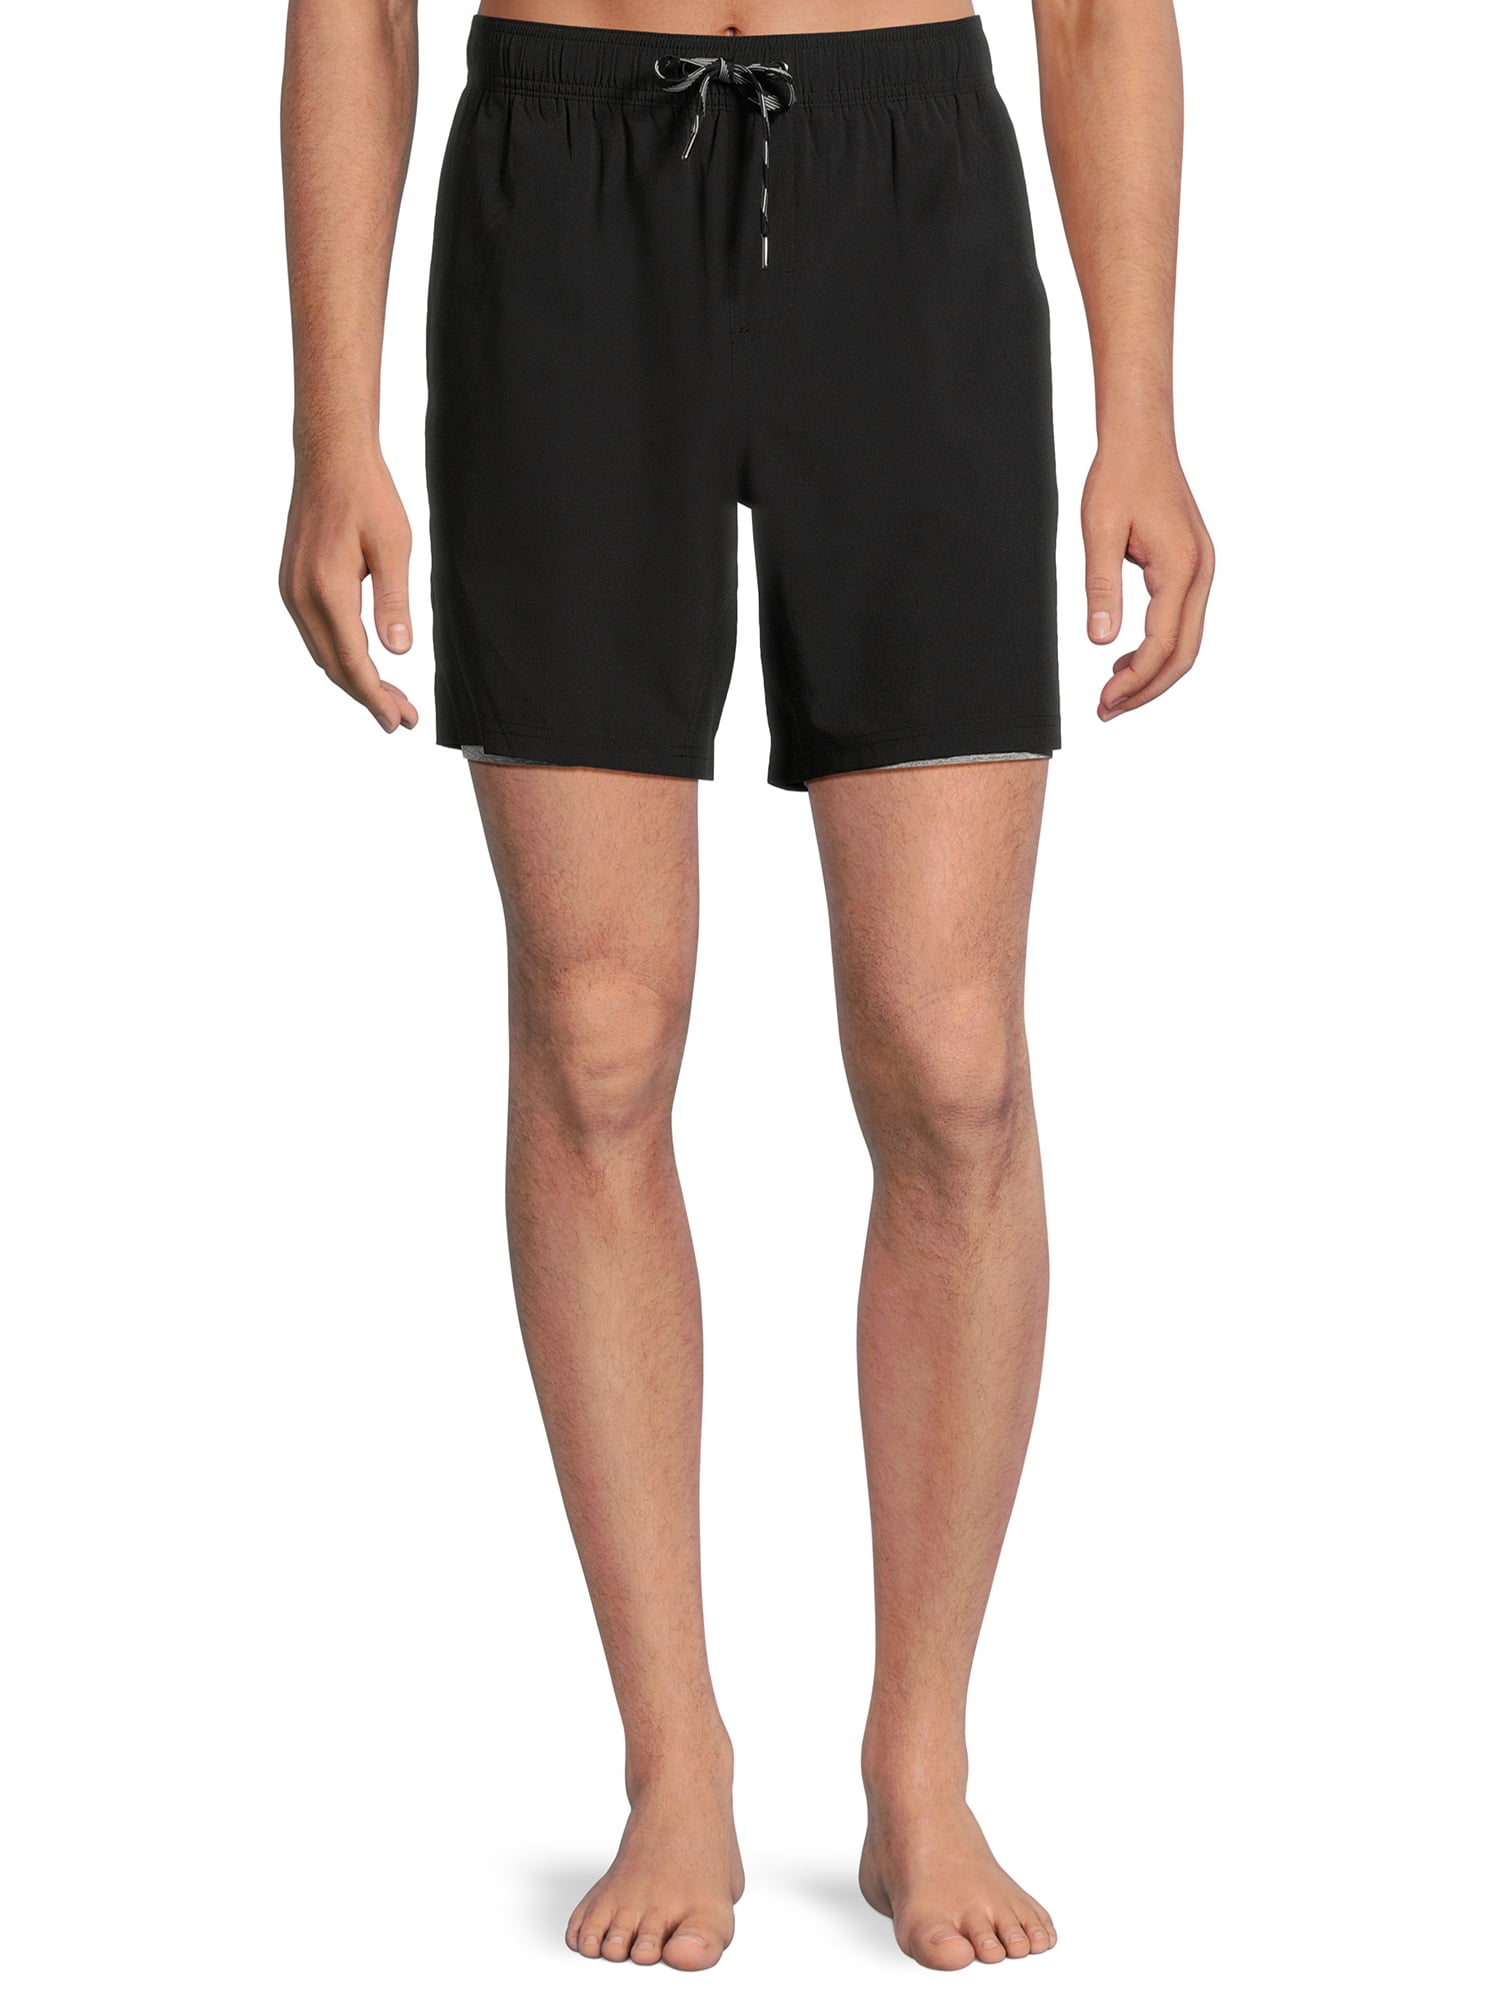 George Men’s Boxer Brief Lined Swim Shorts with UPF 50+, 7